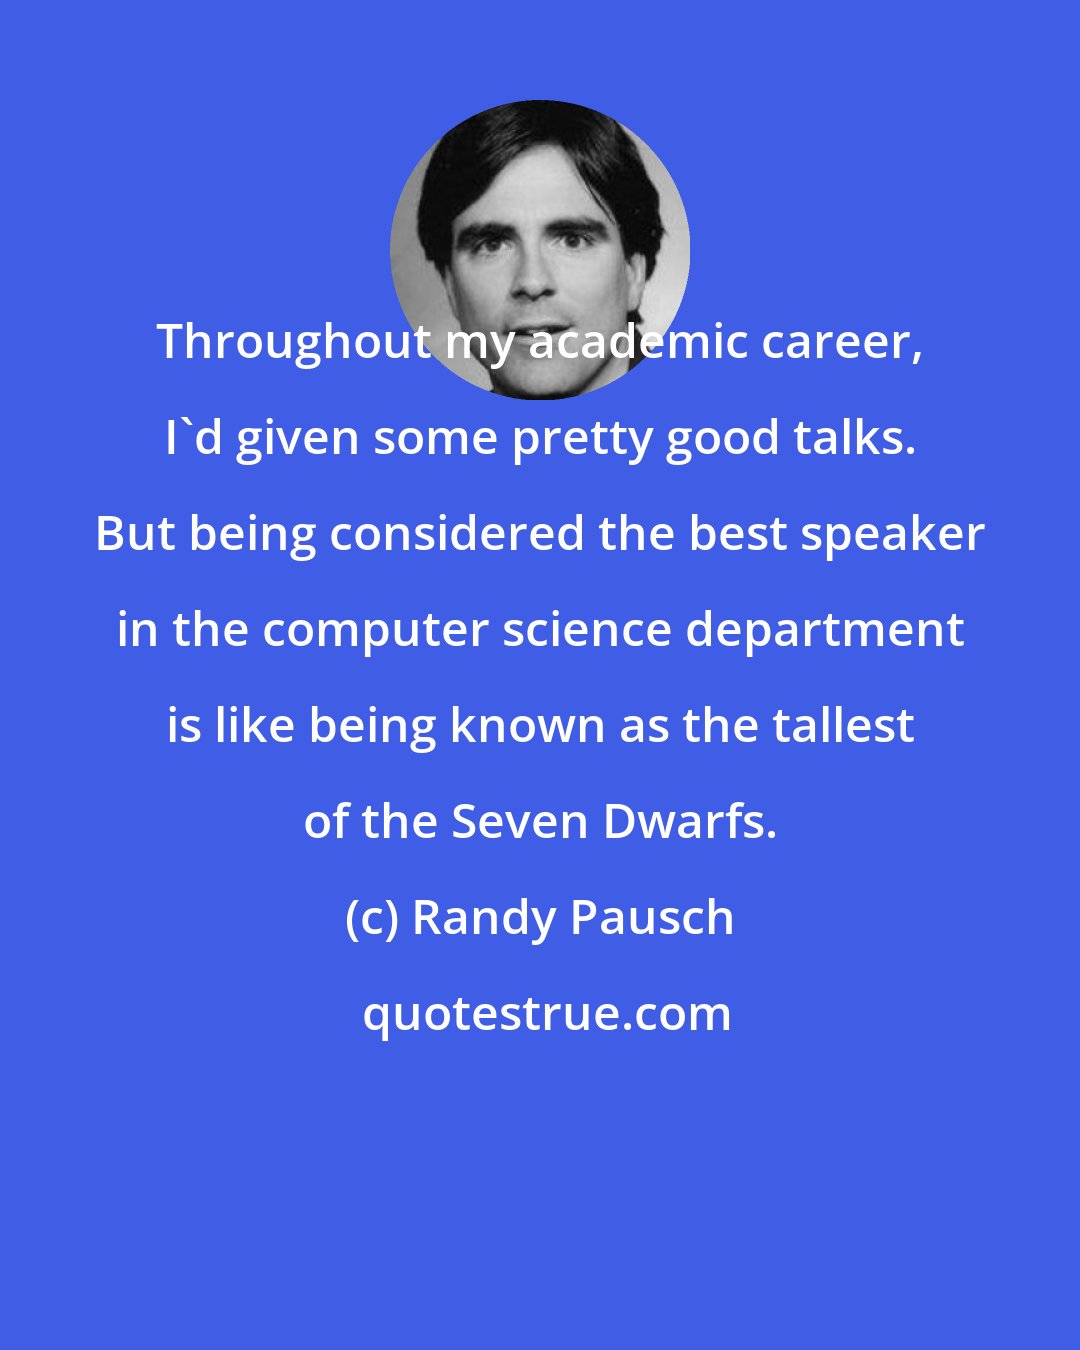 Randy Pausch: Throughout my academic career, I'd given some pretty good talks. But being considered the best speaker in the computer science department is like being known as the tallest of the Seven Dwarfs.